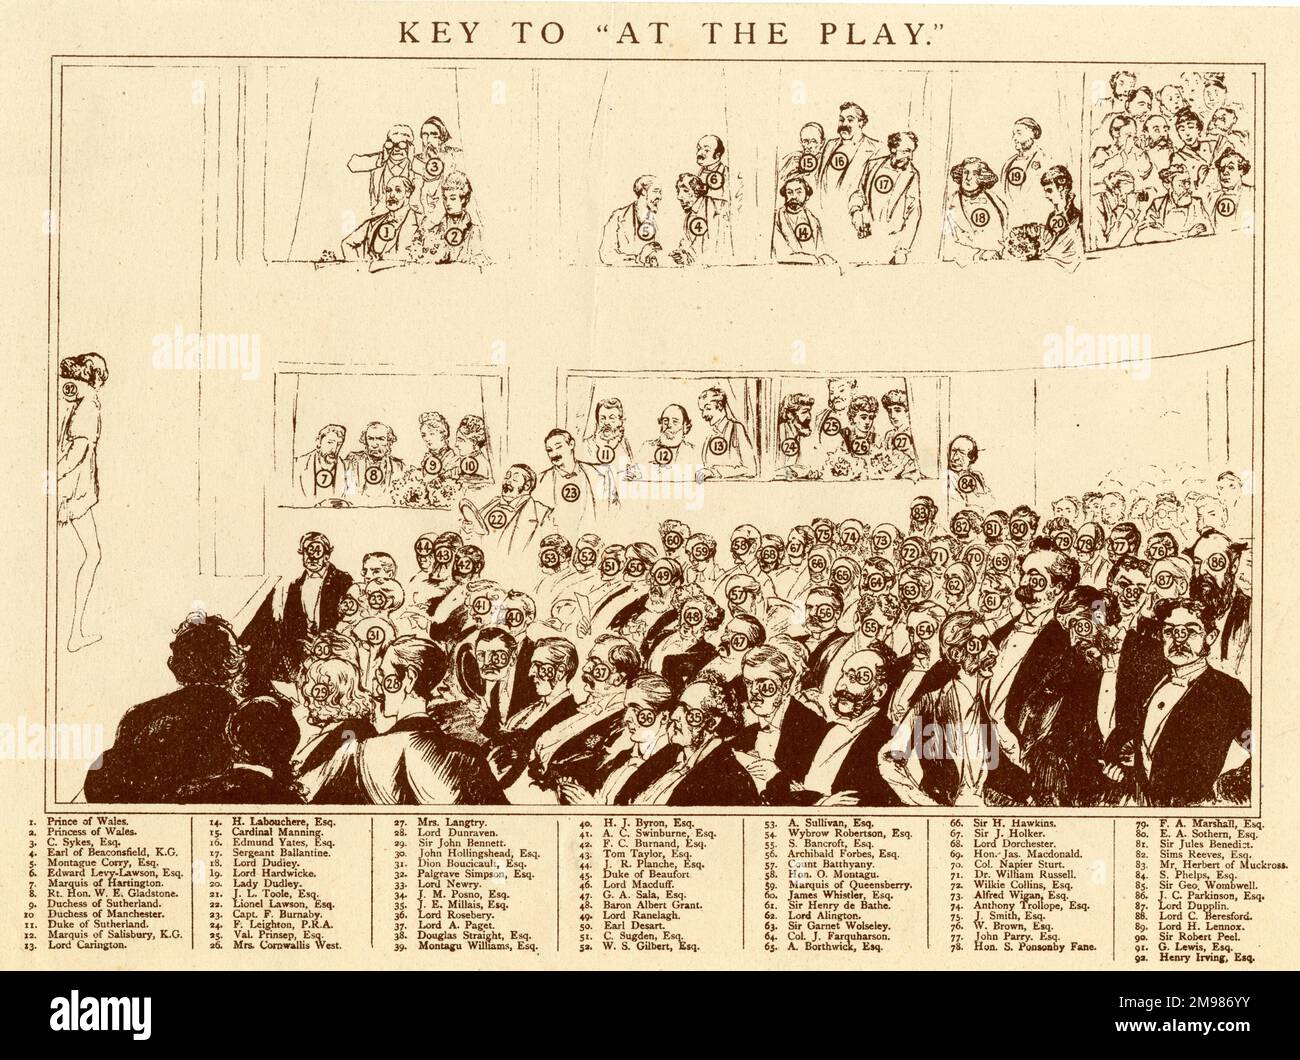 Illustration, At the Play (key).  On the stage of the Lyceum Theatre, London, is Henry Irving, probably in the role of Hamlet.  Audience members include the Prince and Princess of Wales, Benjamin Disraeli, William Gladstone, the Marquis of Salisbury, Cardinal Manning, Frederick Leighton, Val Prinsep, Lillie Langtry, John Everett Millais, Lord Rosebery, W S Gilbert and Arthur Sullivan.   (see colour illustration, 11075116) Stock Photo